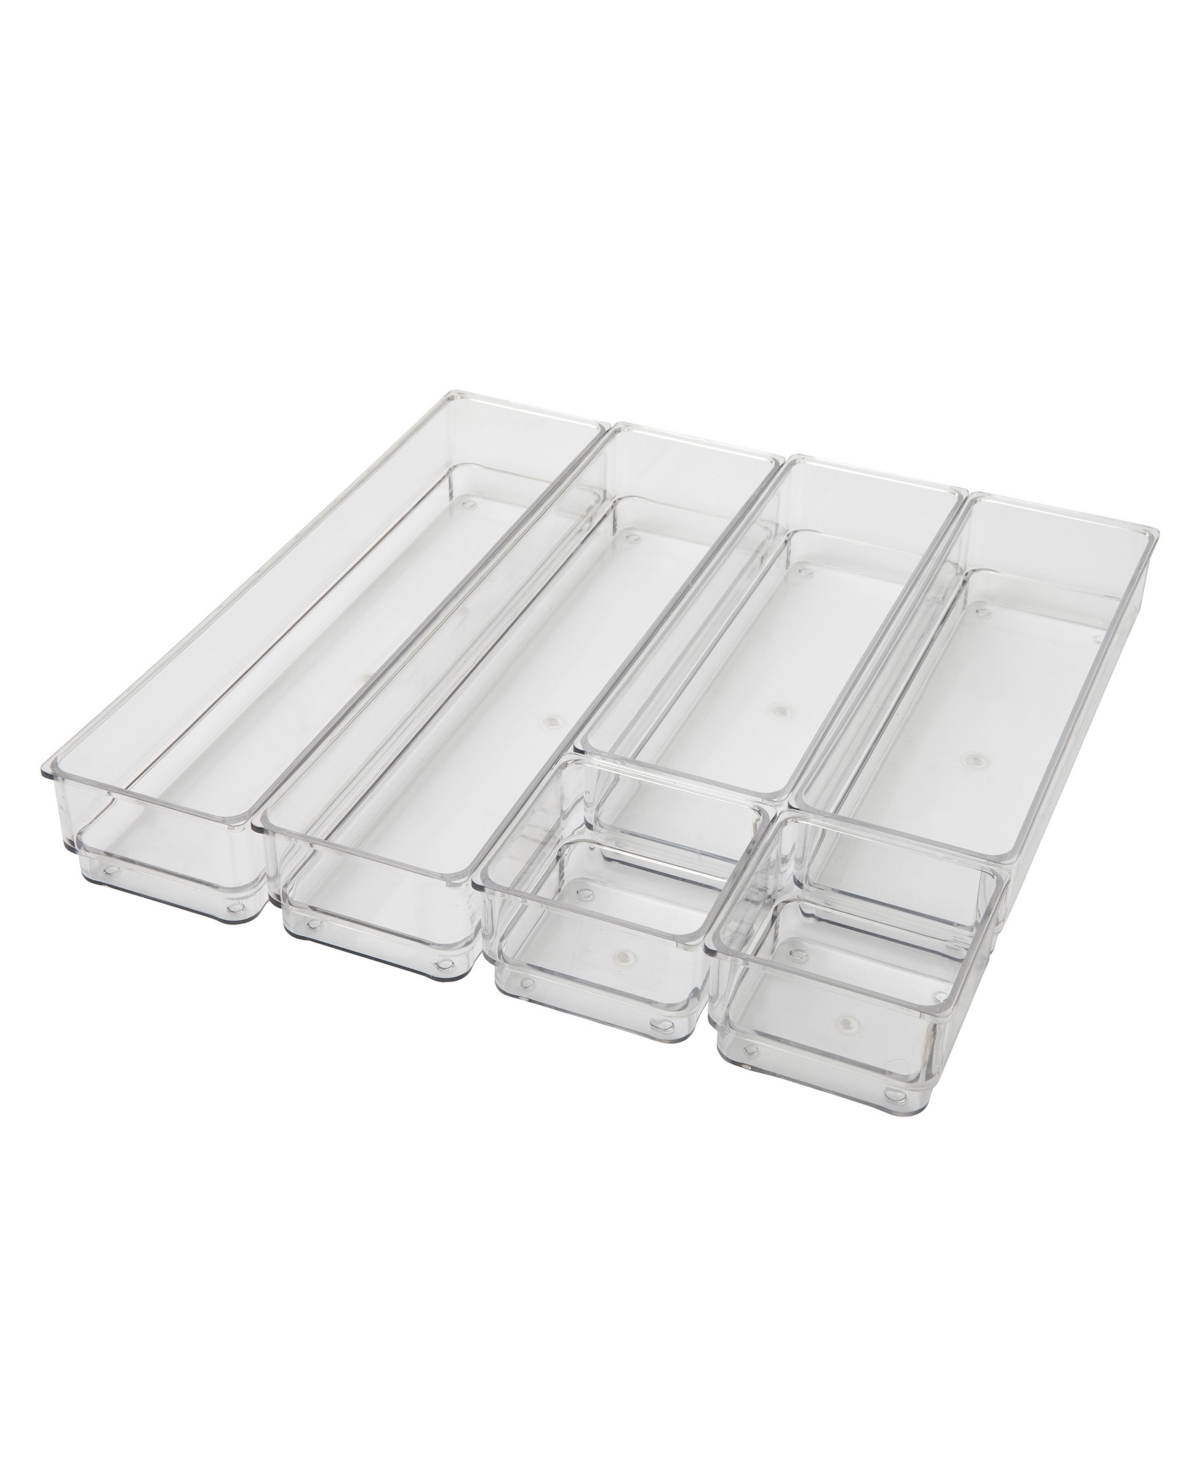 Miles Plastic Stackable Office Desk Drawer Organizers, Various Sizes, 6 Compartments - Clear